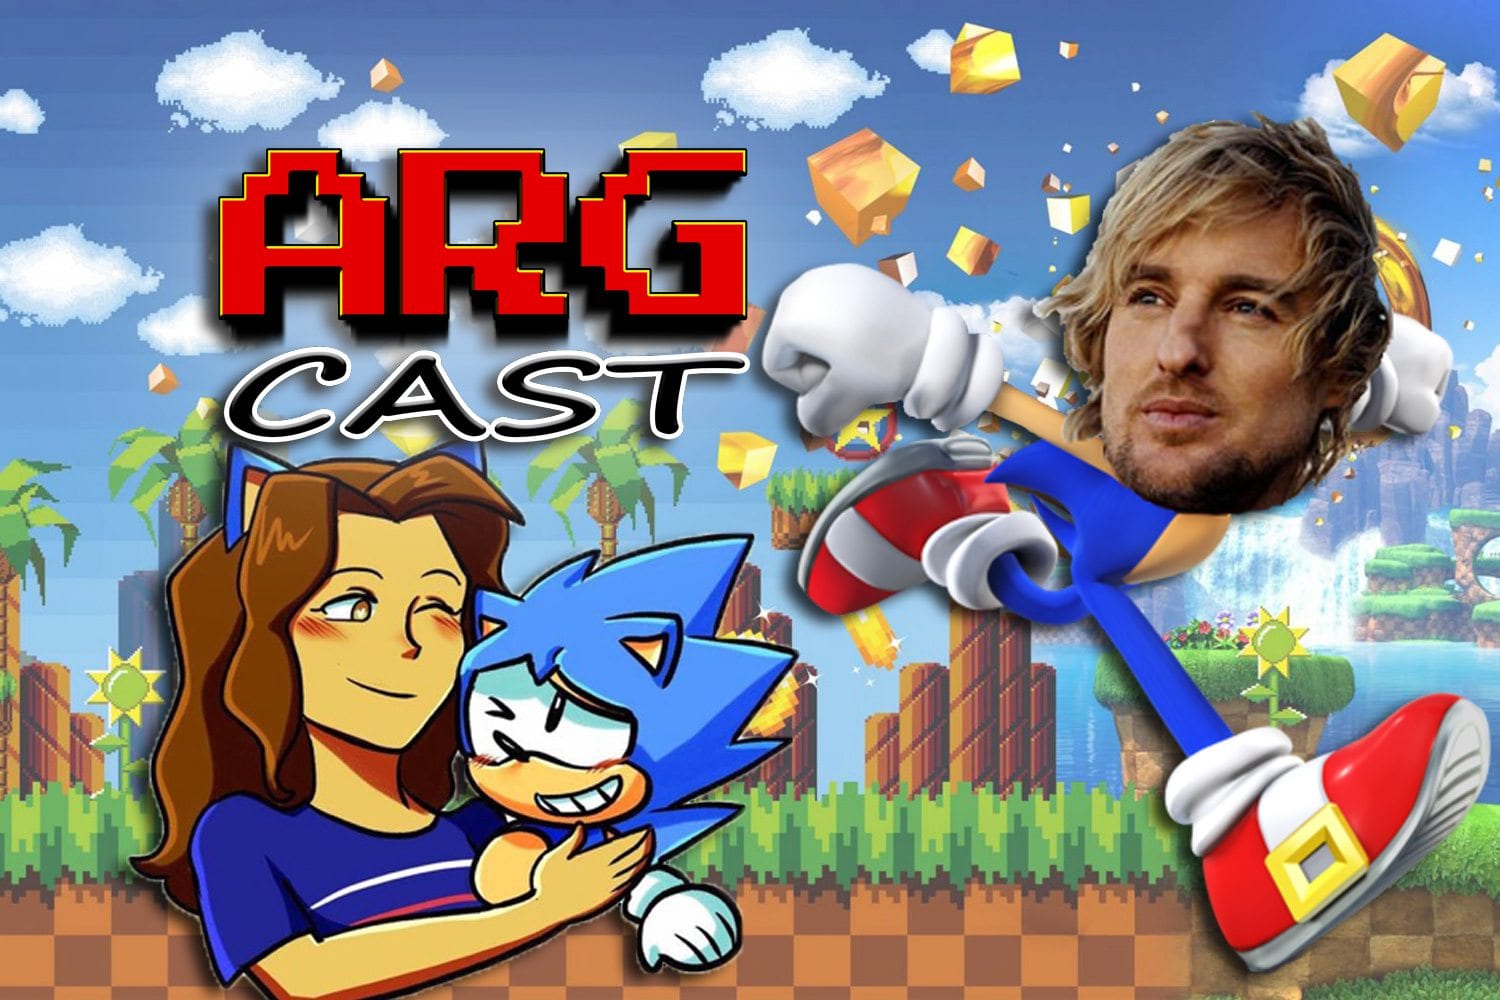 ARGcast #102: Wow, it's Sonic the Hedgehog with Lizzy Silvas